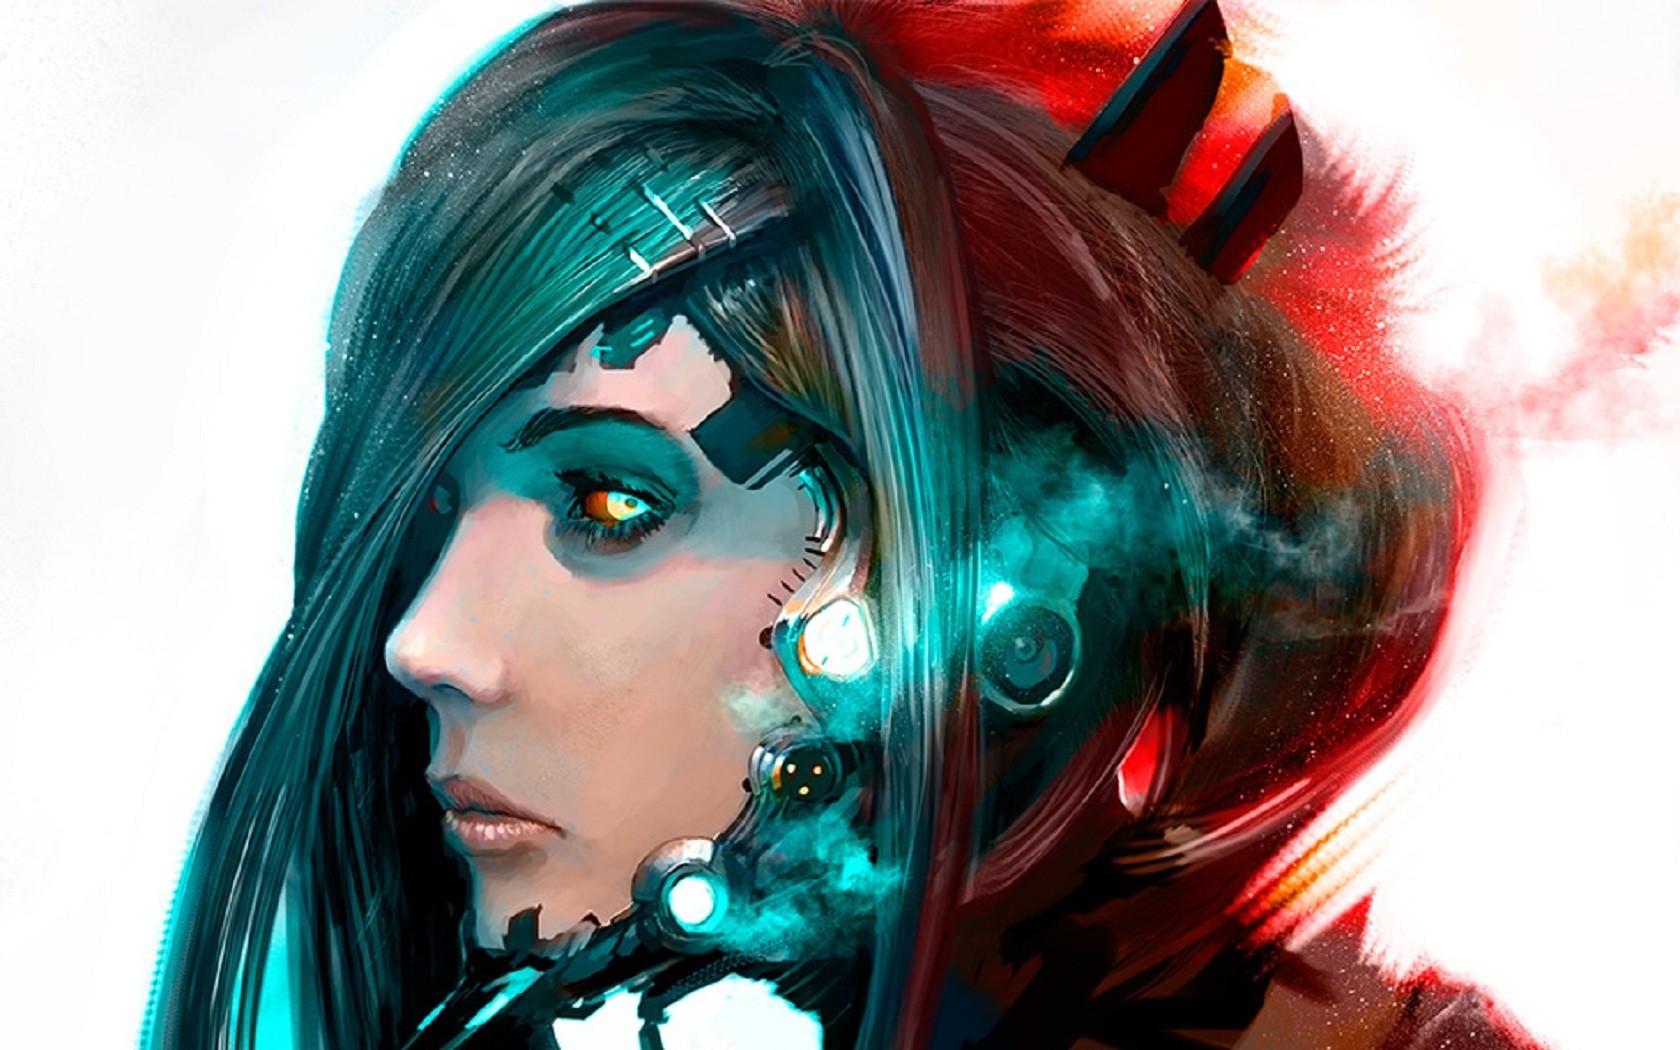 General 1680x1050 science fiction women cyborg artwork fantasy art robot concept art androids red turquoise cyan